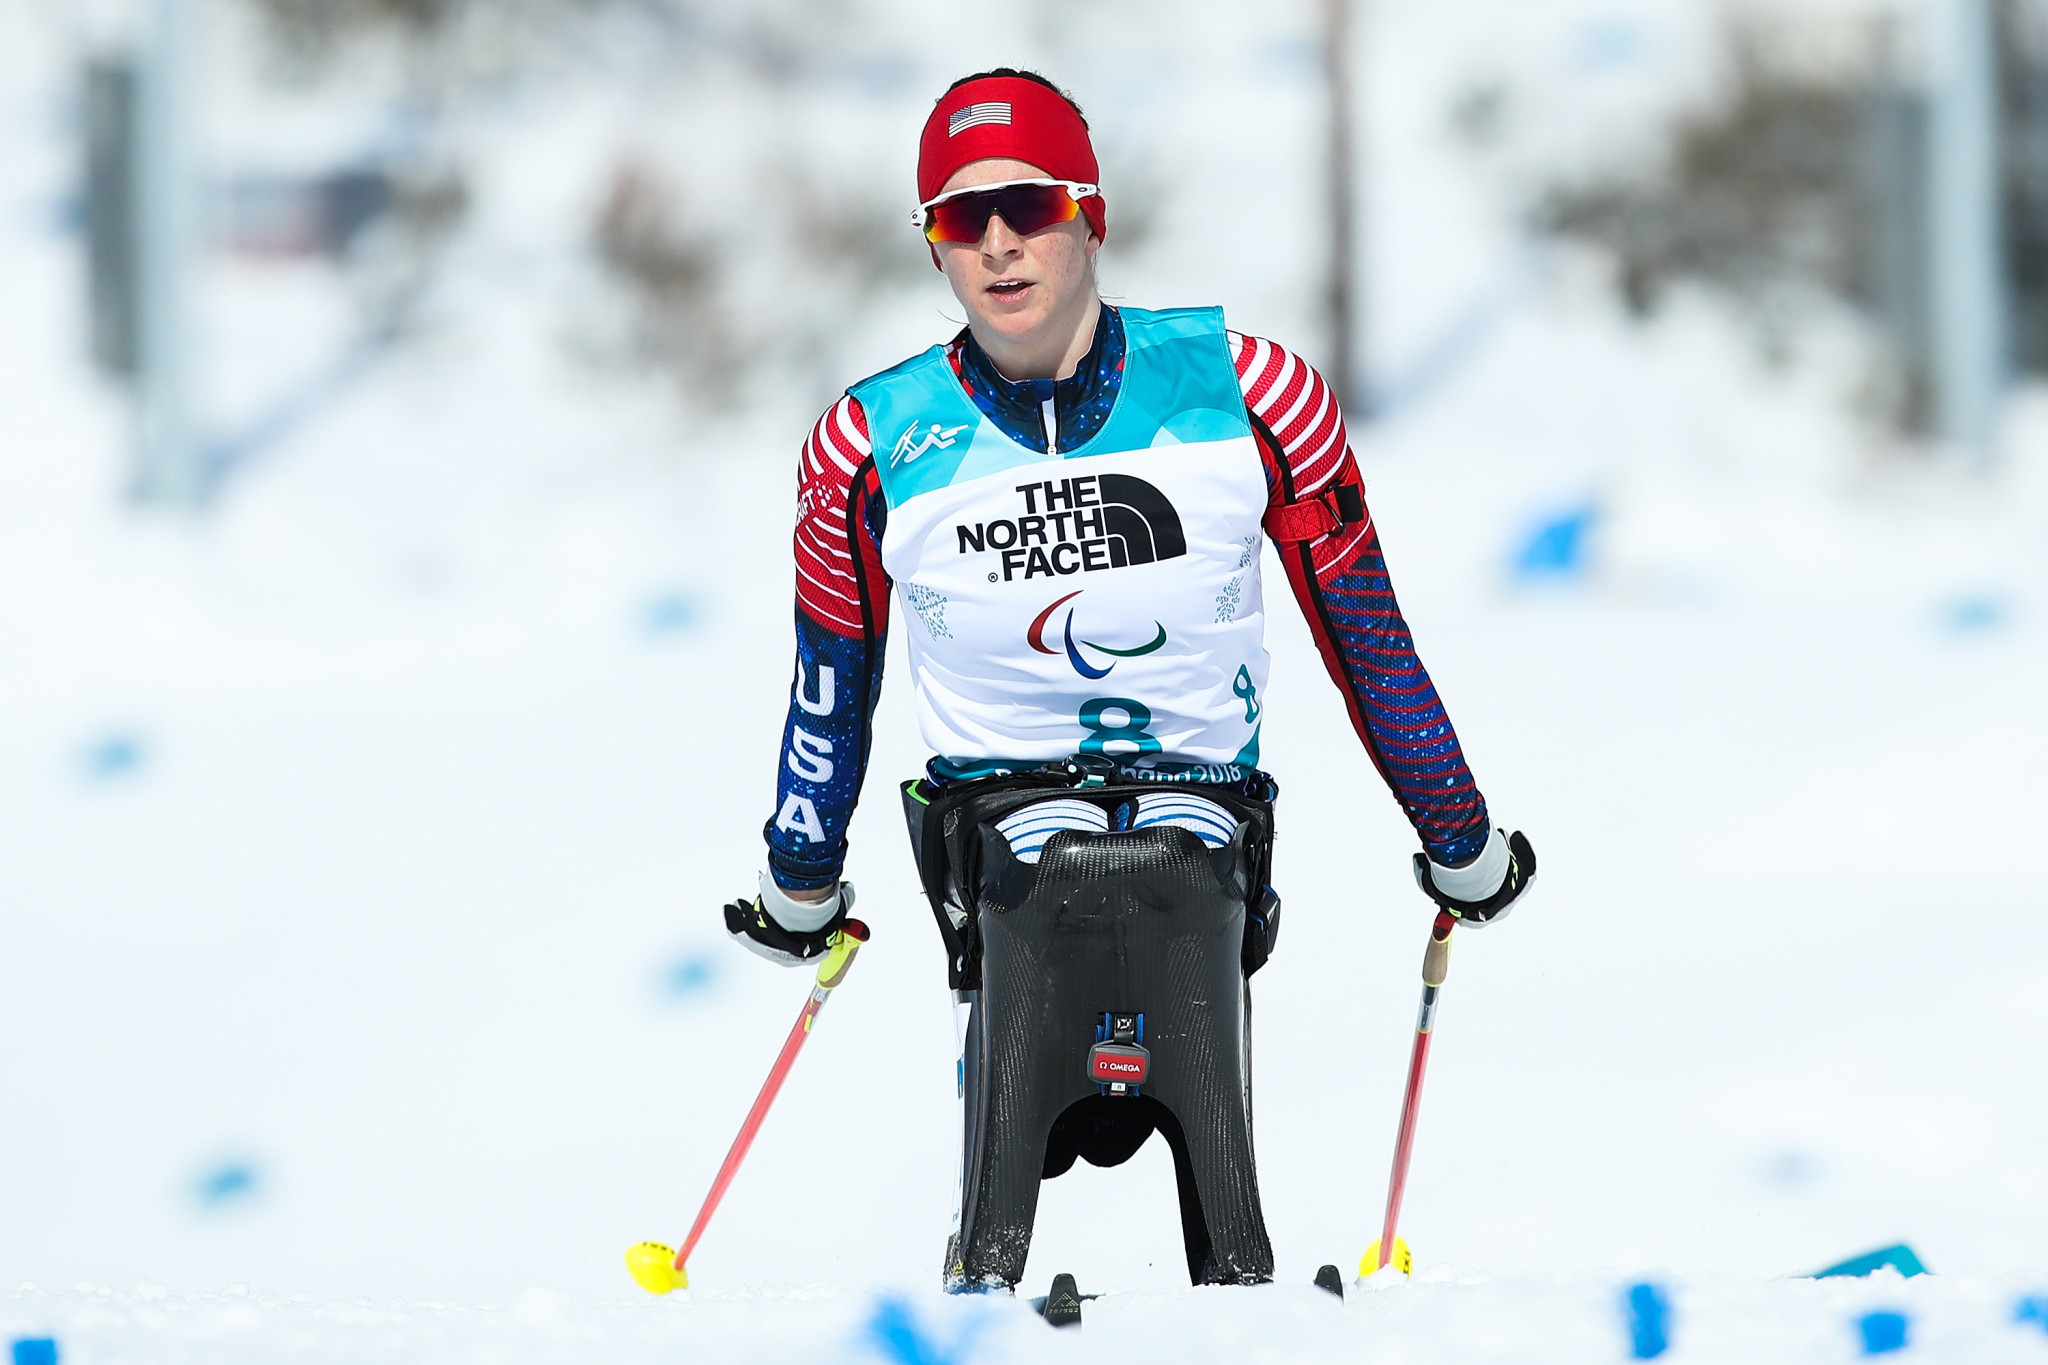 United States and Neutral Paralympic Athletes dominate biathlon on opening day of Pyeongchang 2018